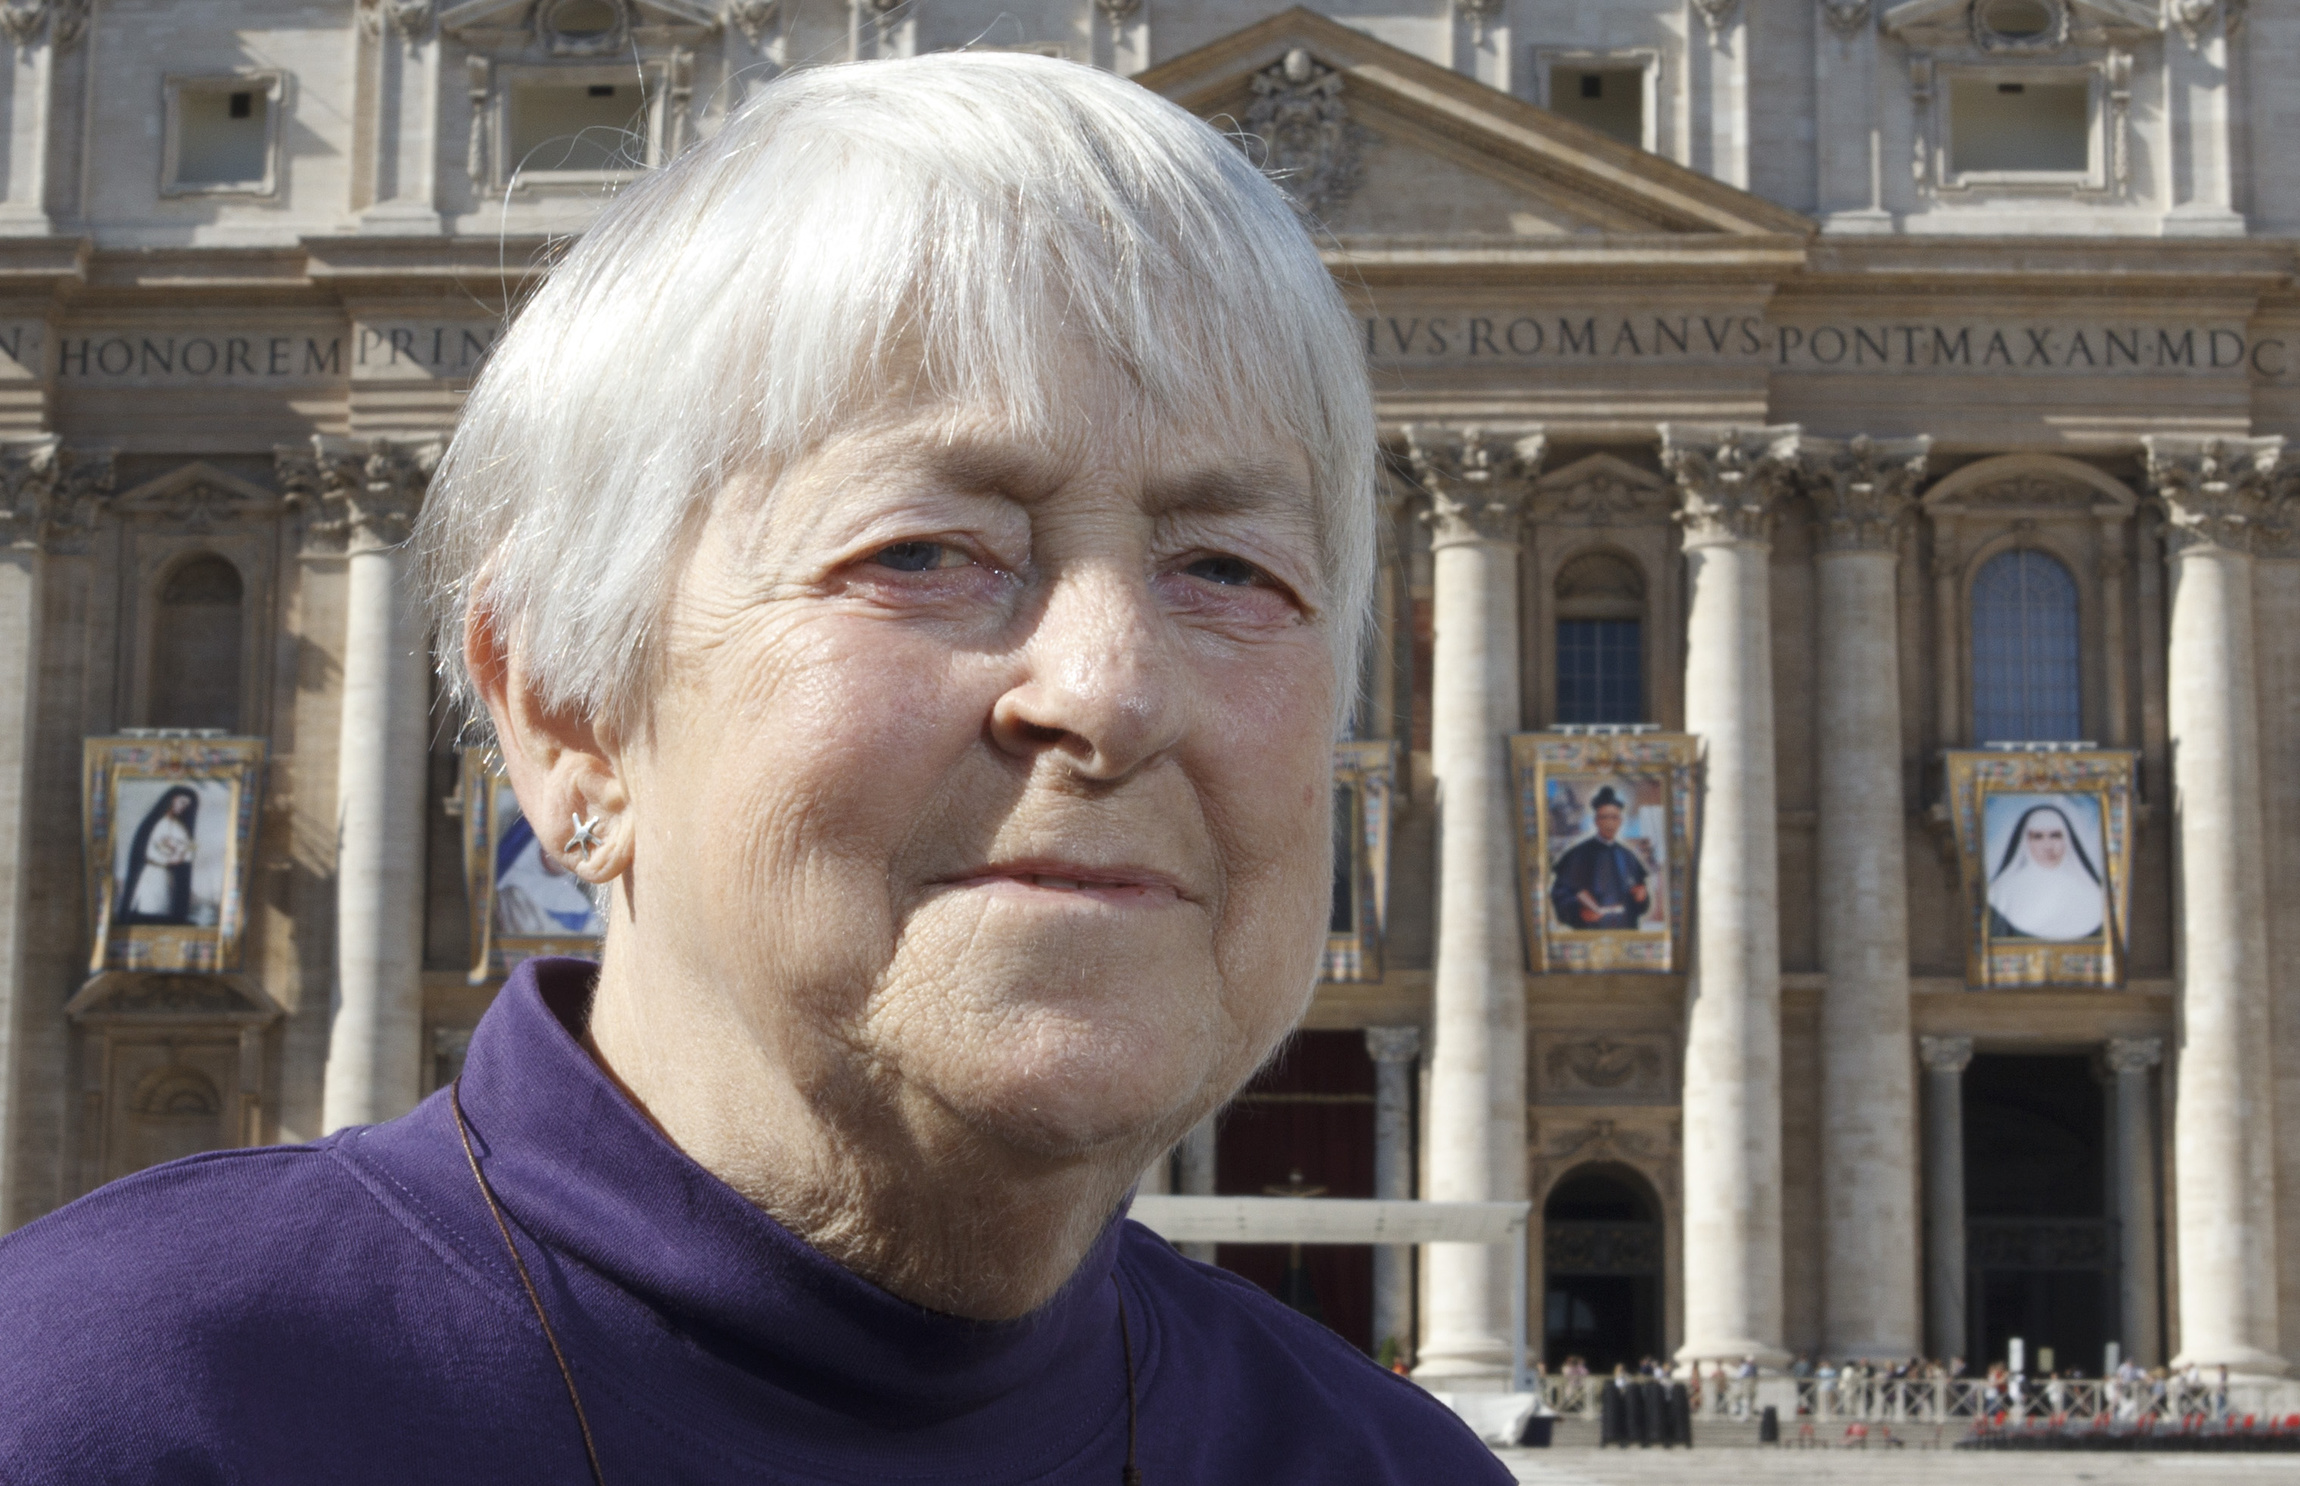 SHARON SMITH, WHOSE CURE WAS MIRACLE FOR CANONIZATION OF BLESSED MARIANNE COPE, PICTURED IN FRONT OF ST. PETER'S BASILICA